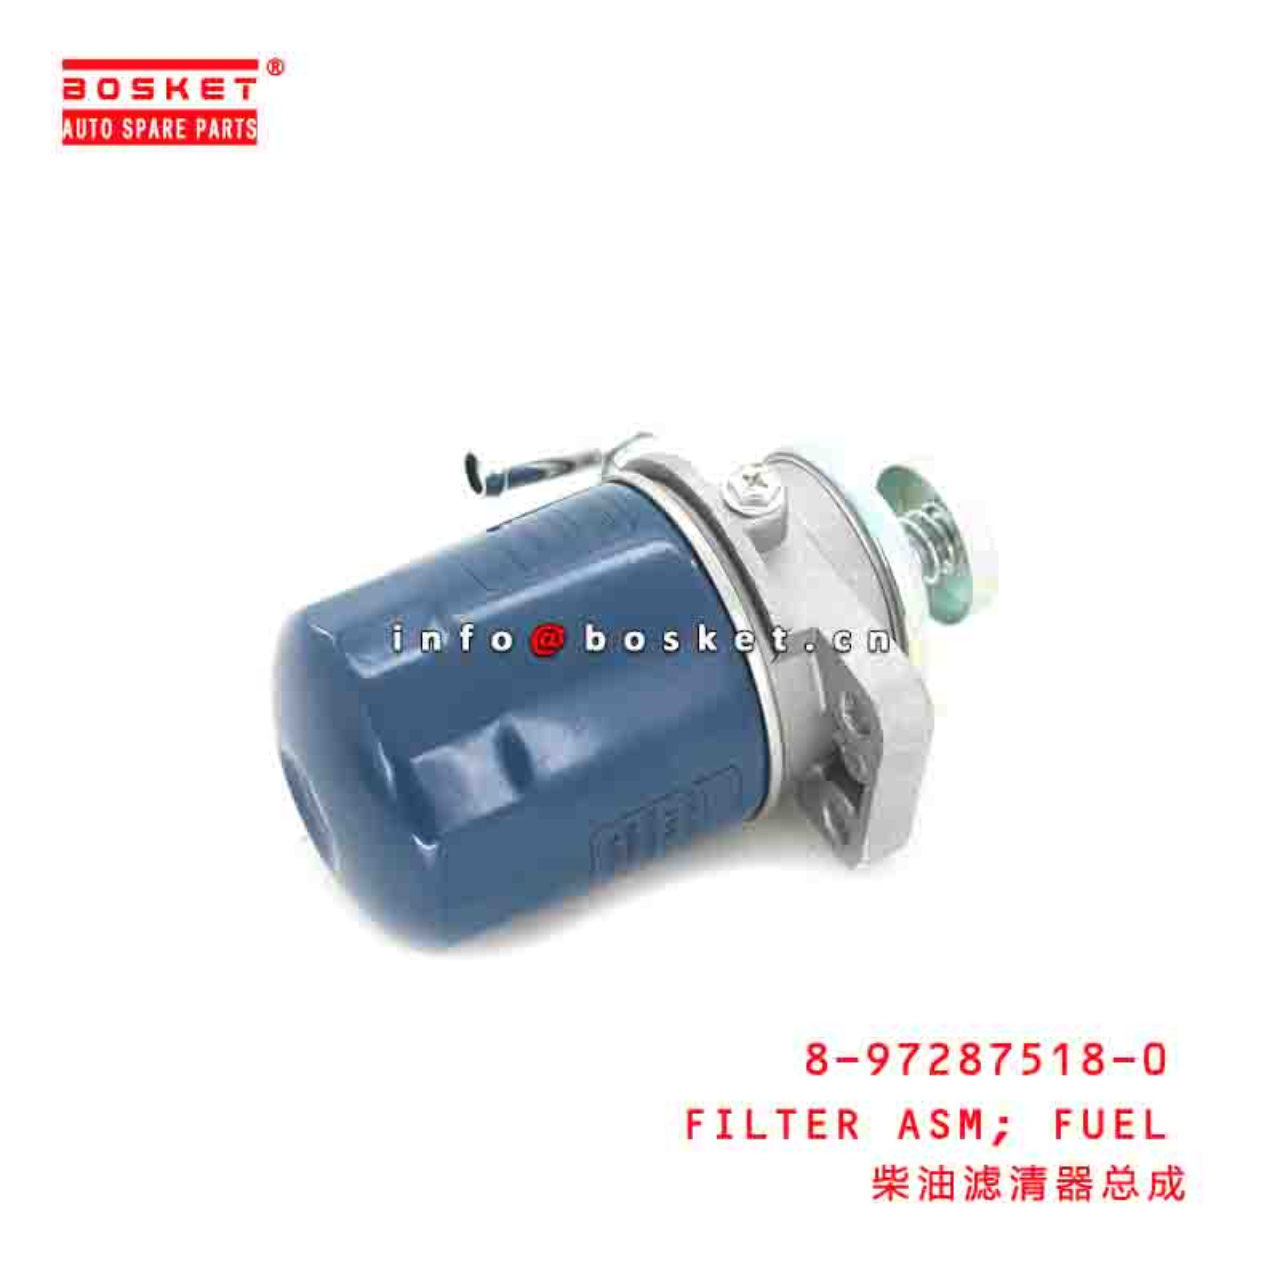  8-97287518-0 8972875180 FUEL FILTER ASSEMBLY Suitable FOR ISUZU D-MAX 4JH1